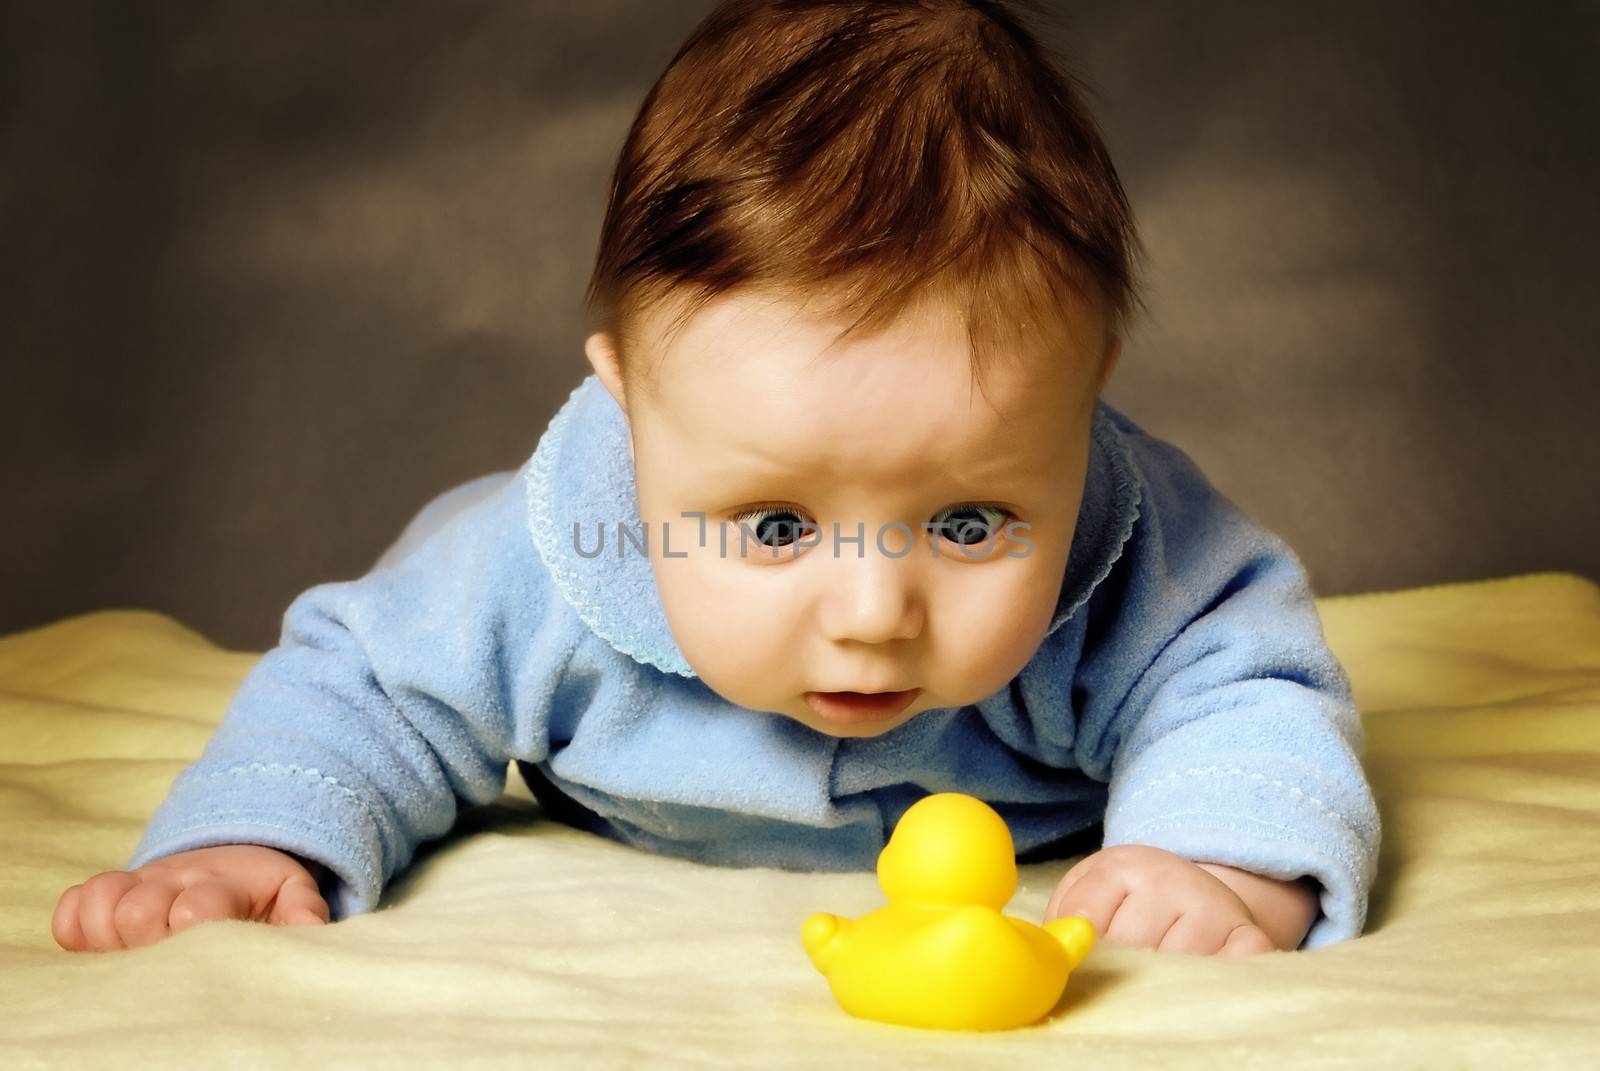 A child with surprise considers a toy duck.